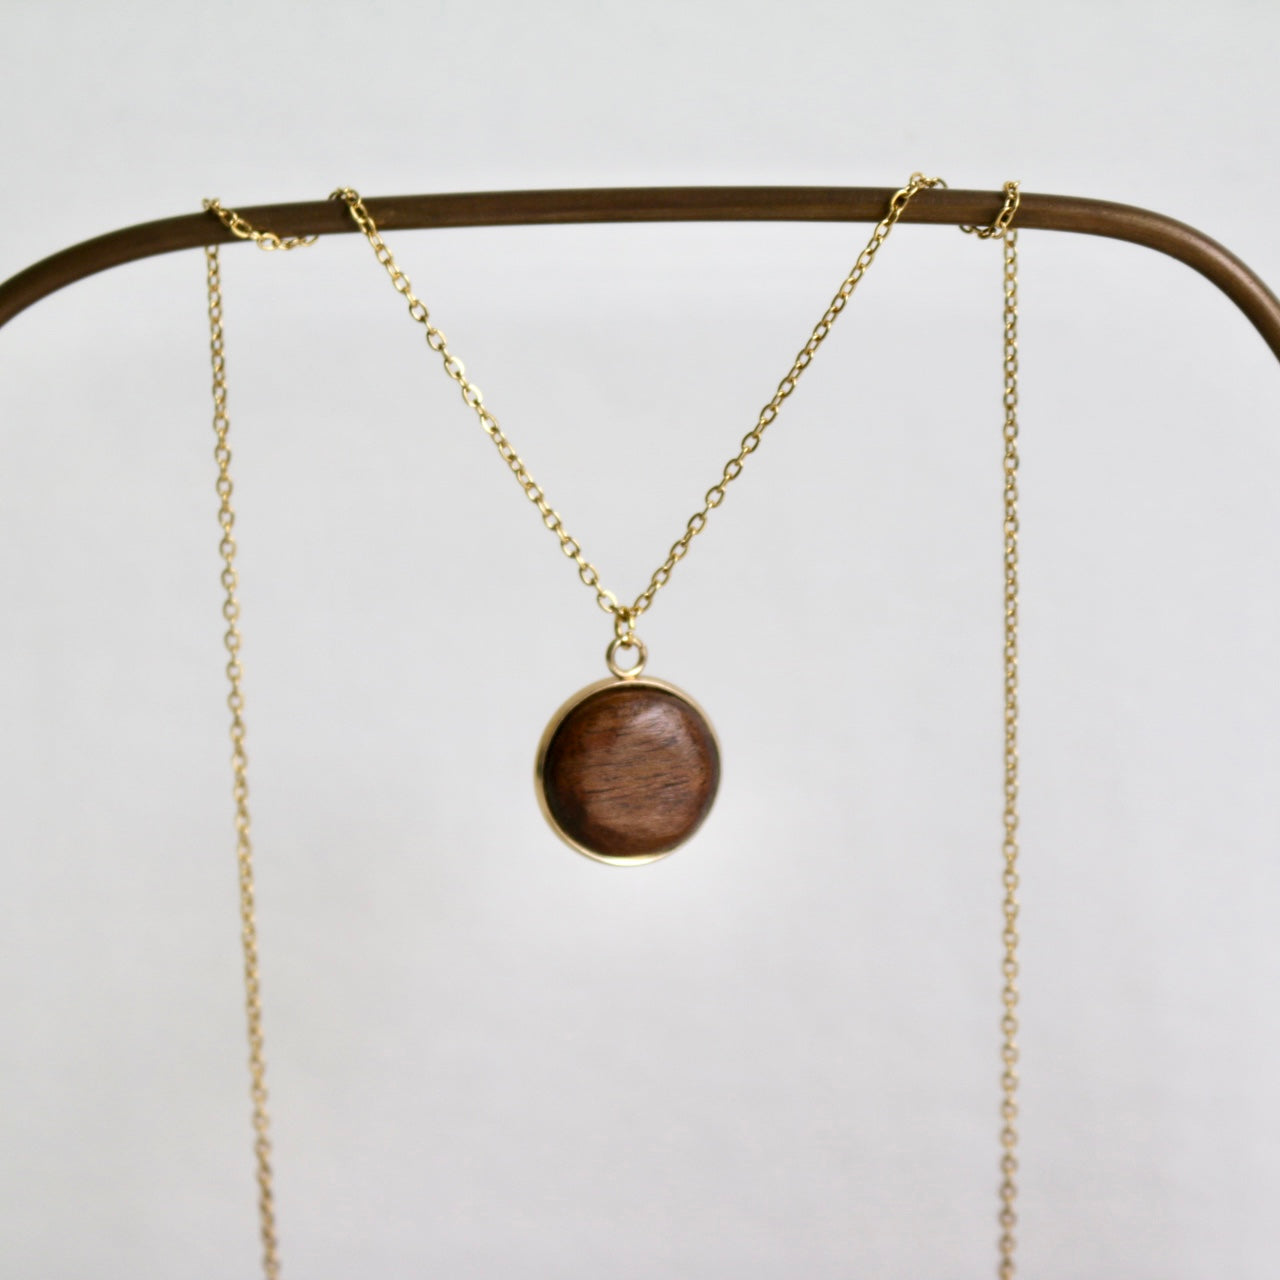 Camille Necklace - Small